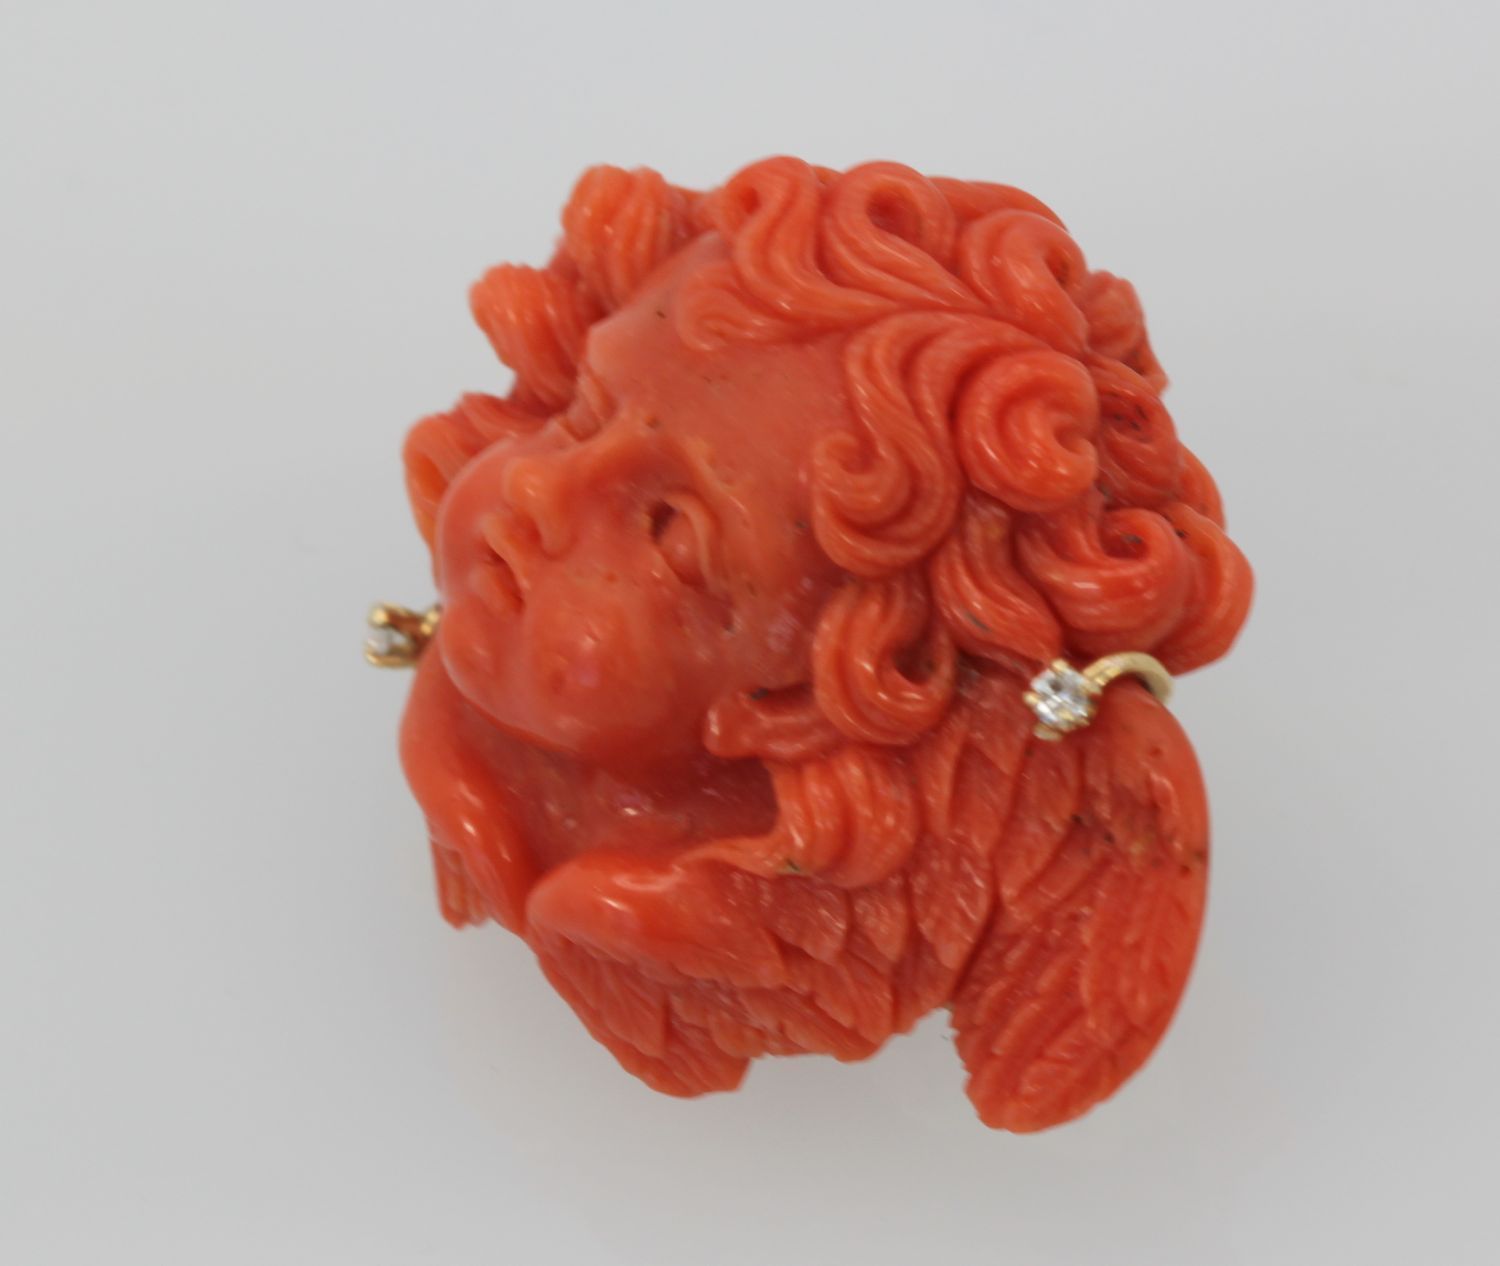 Antique Hand Carved Coral Putti Cherub Angel Brooch – right angle